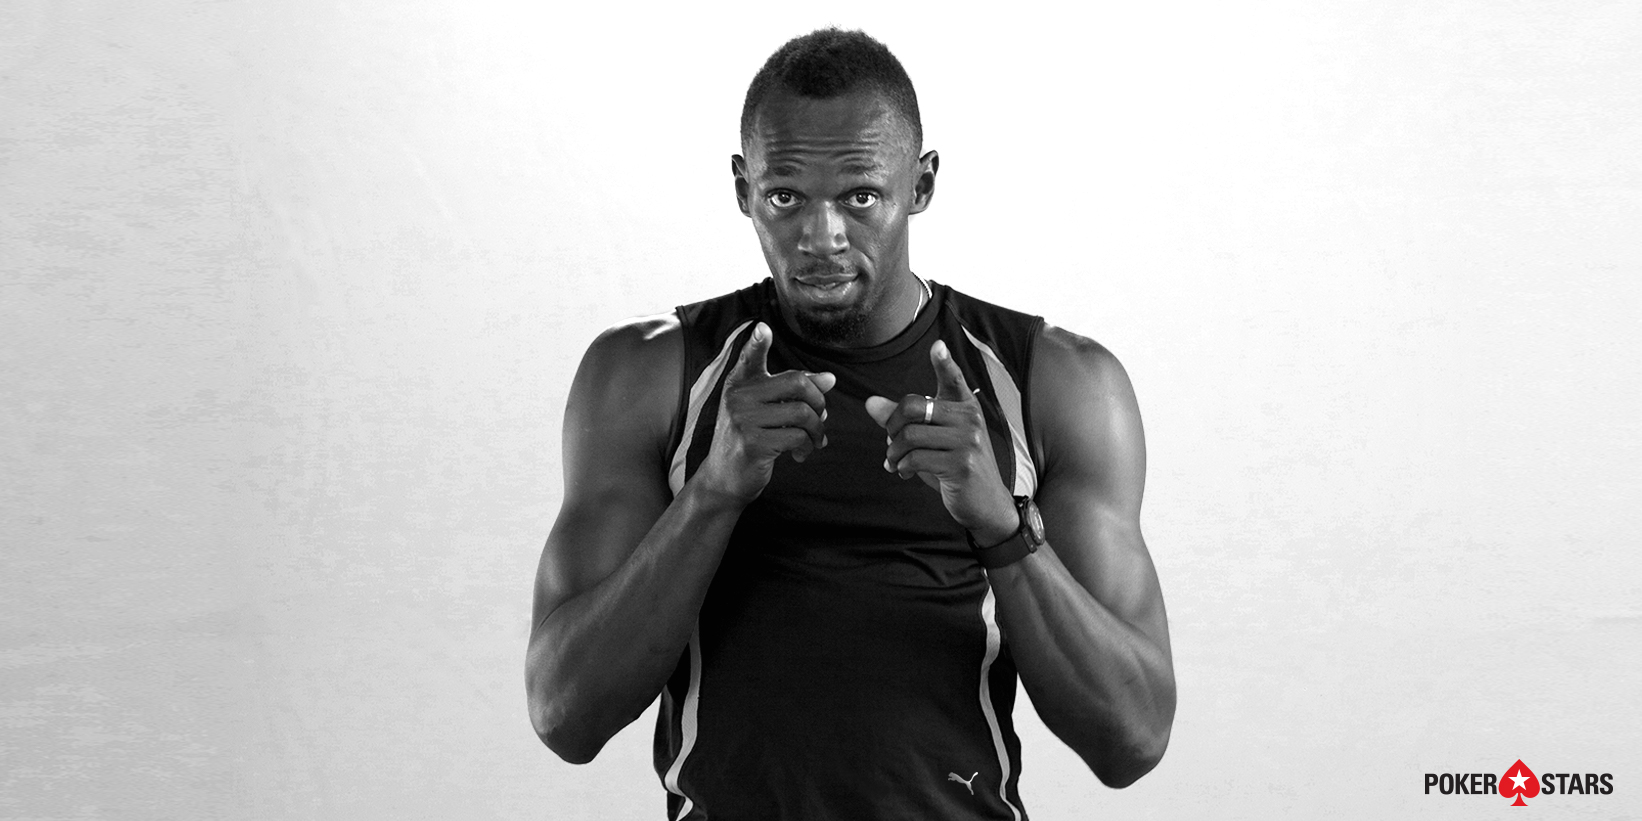 Usain Bolt’s Retirements Gives Him Time to Focus on Poker